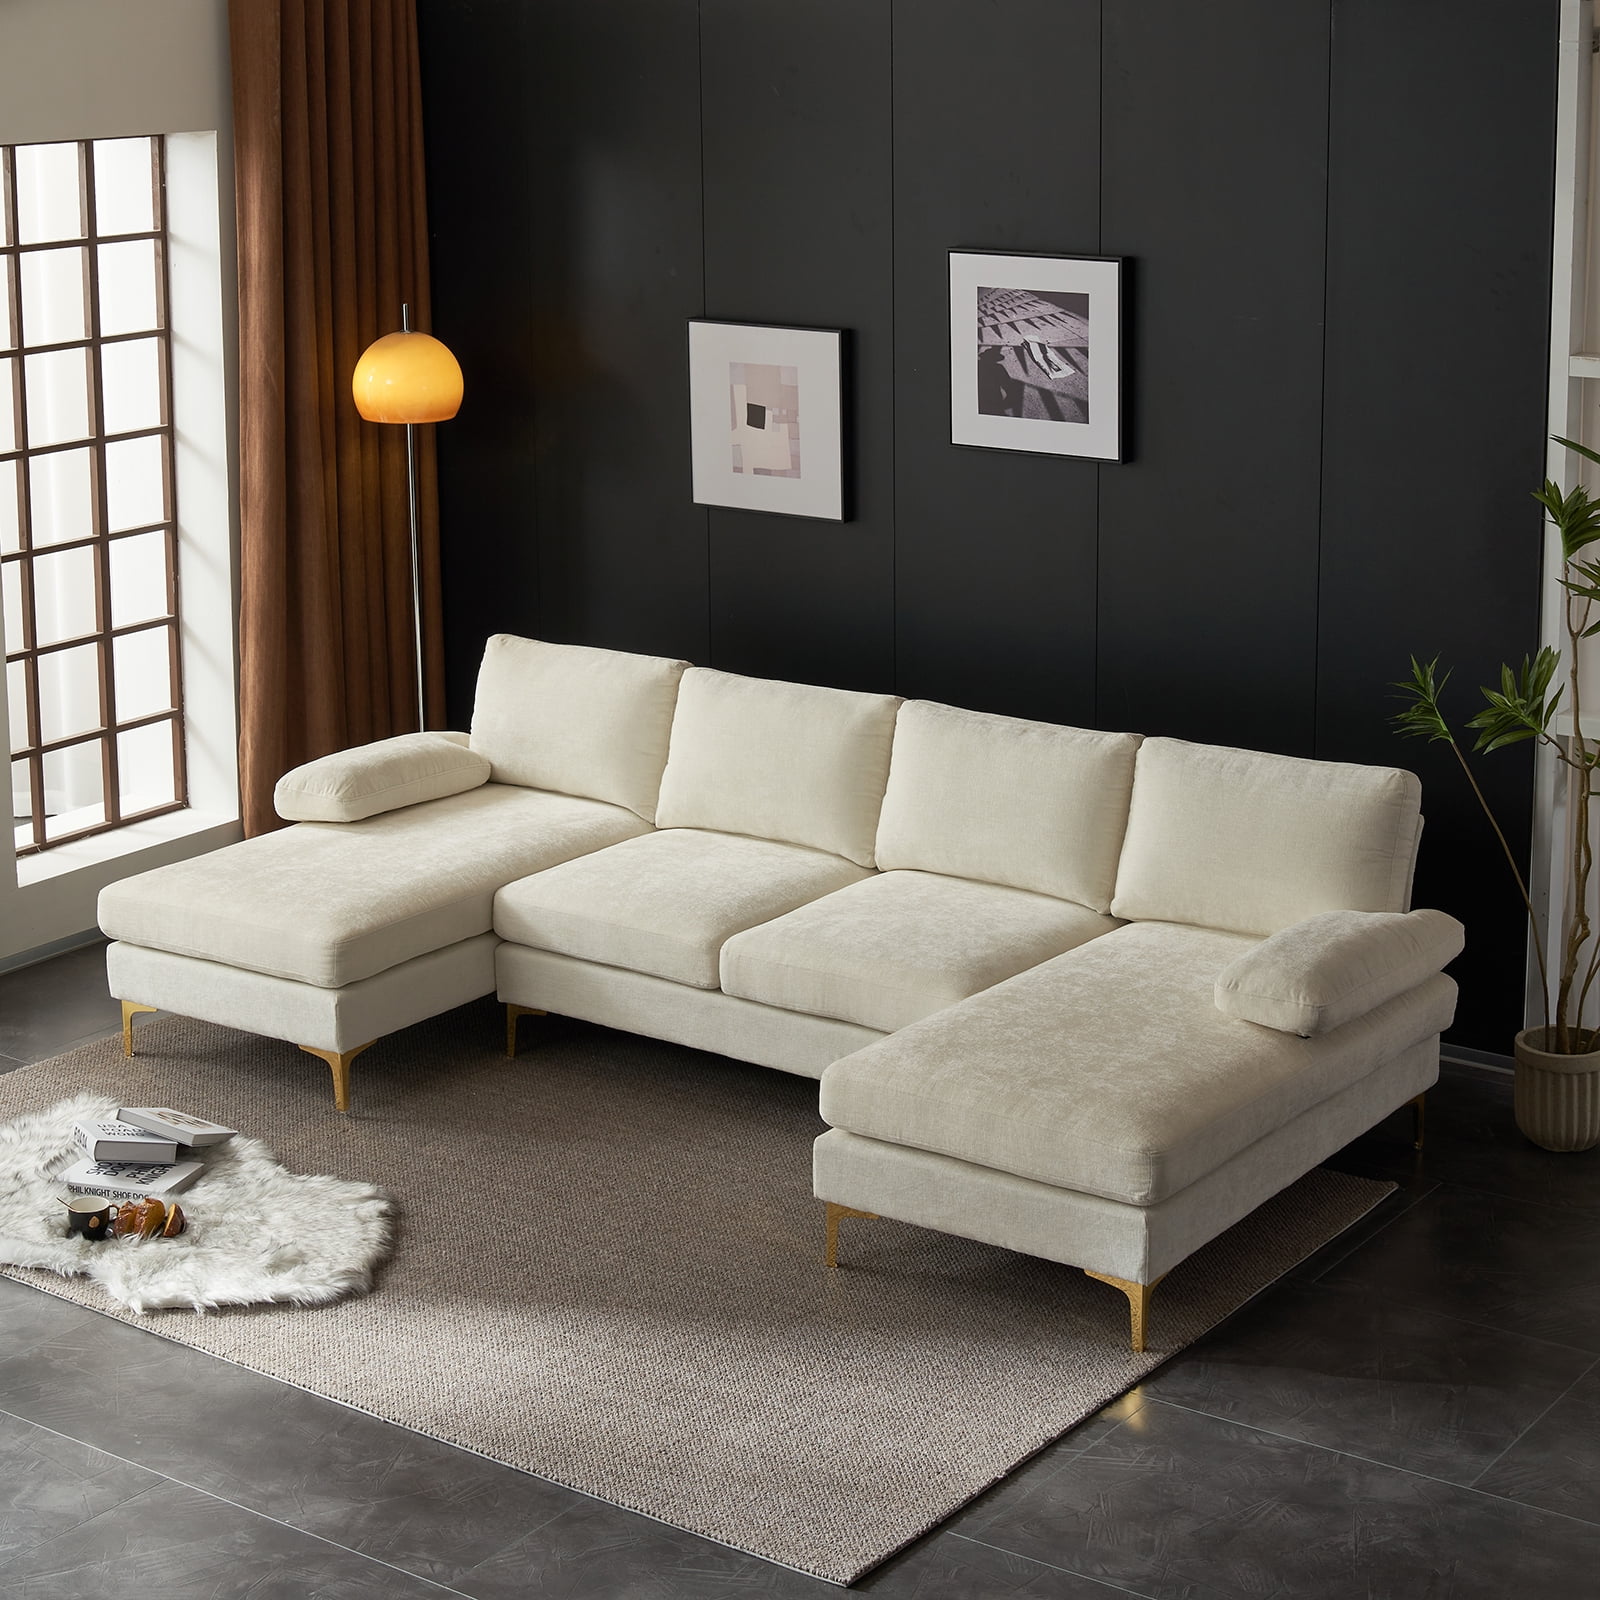 Zimtown Convertible Sectional Sofa,U Shaped Couch with Double ...